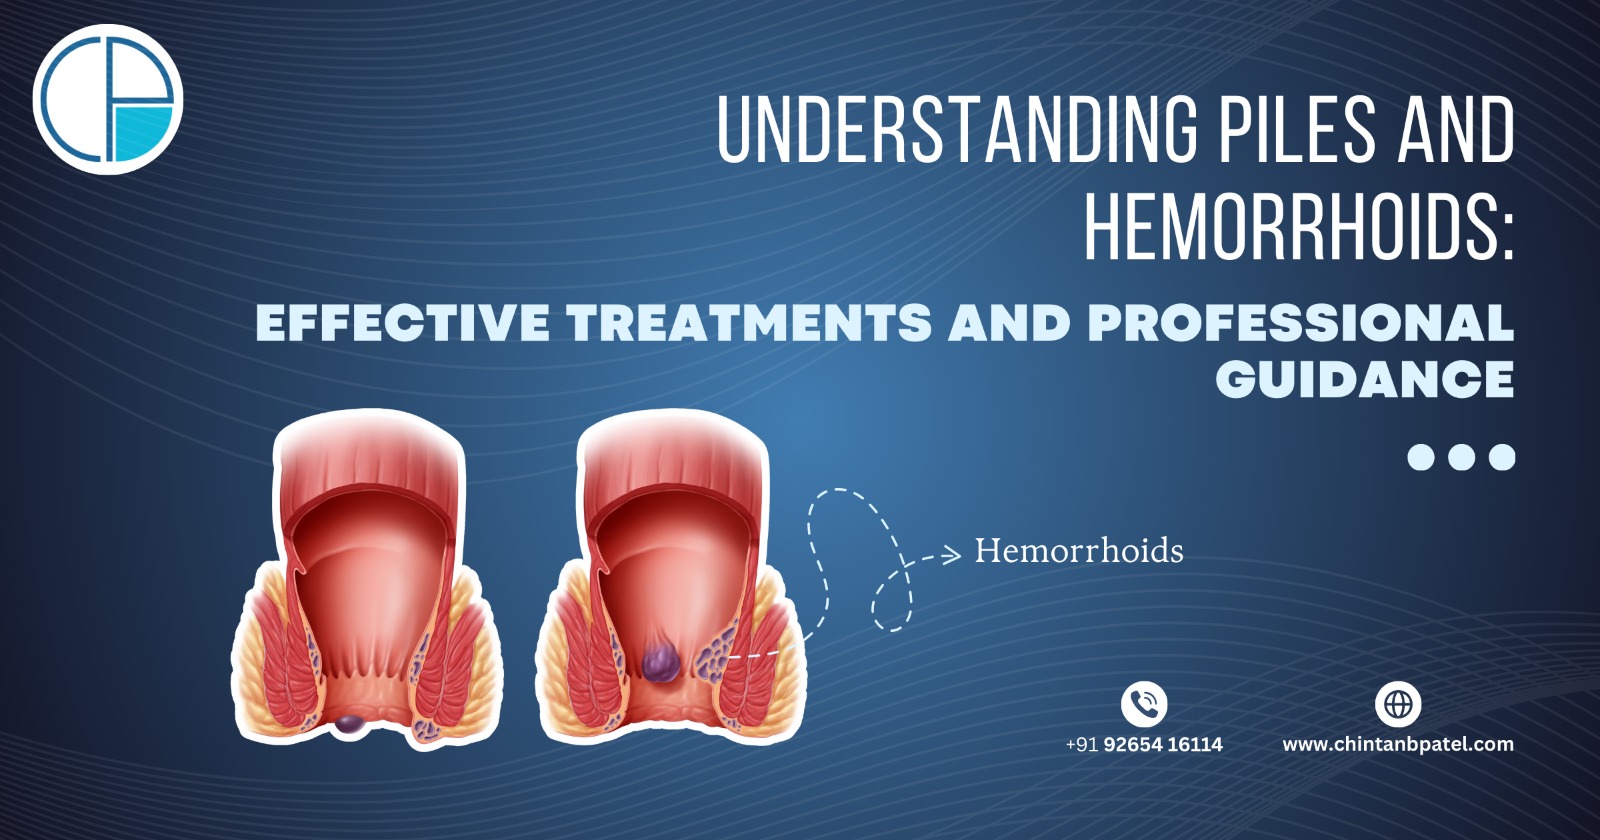 Understanding Piles and Hemorrhoids: Effective Treatments and Professional Guidance